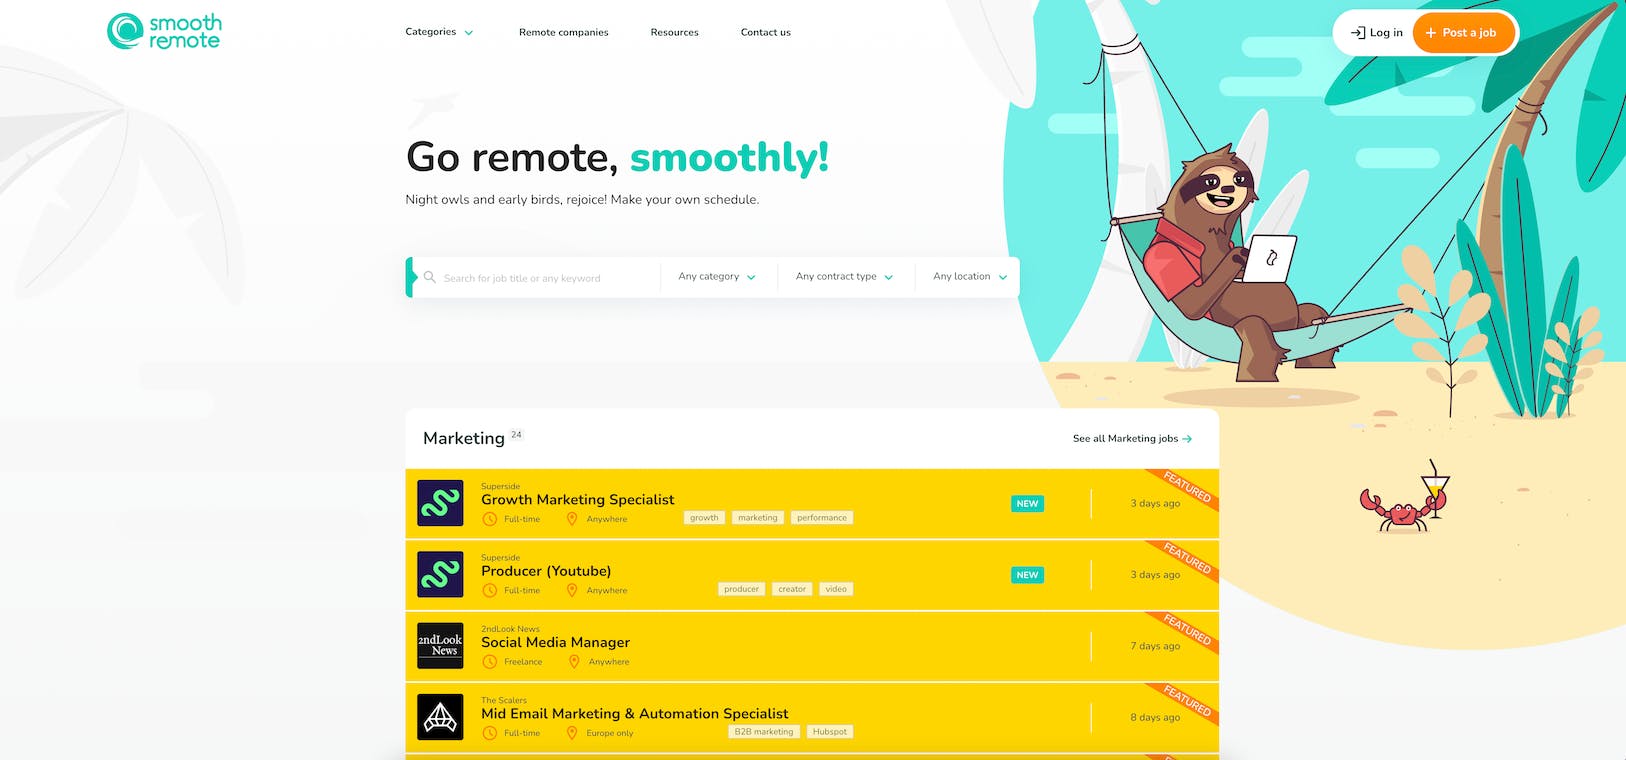 Find detailed information about Smooth Remote